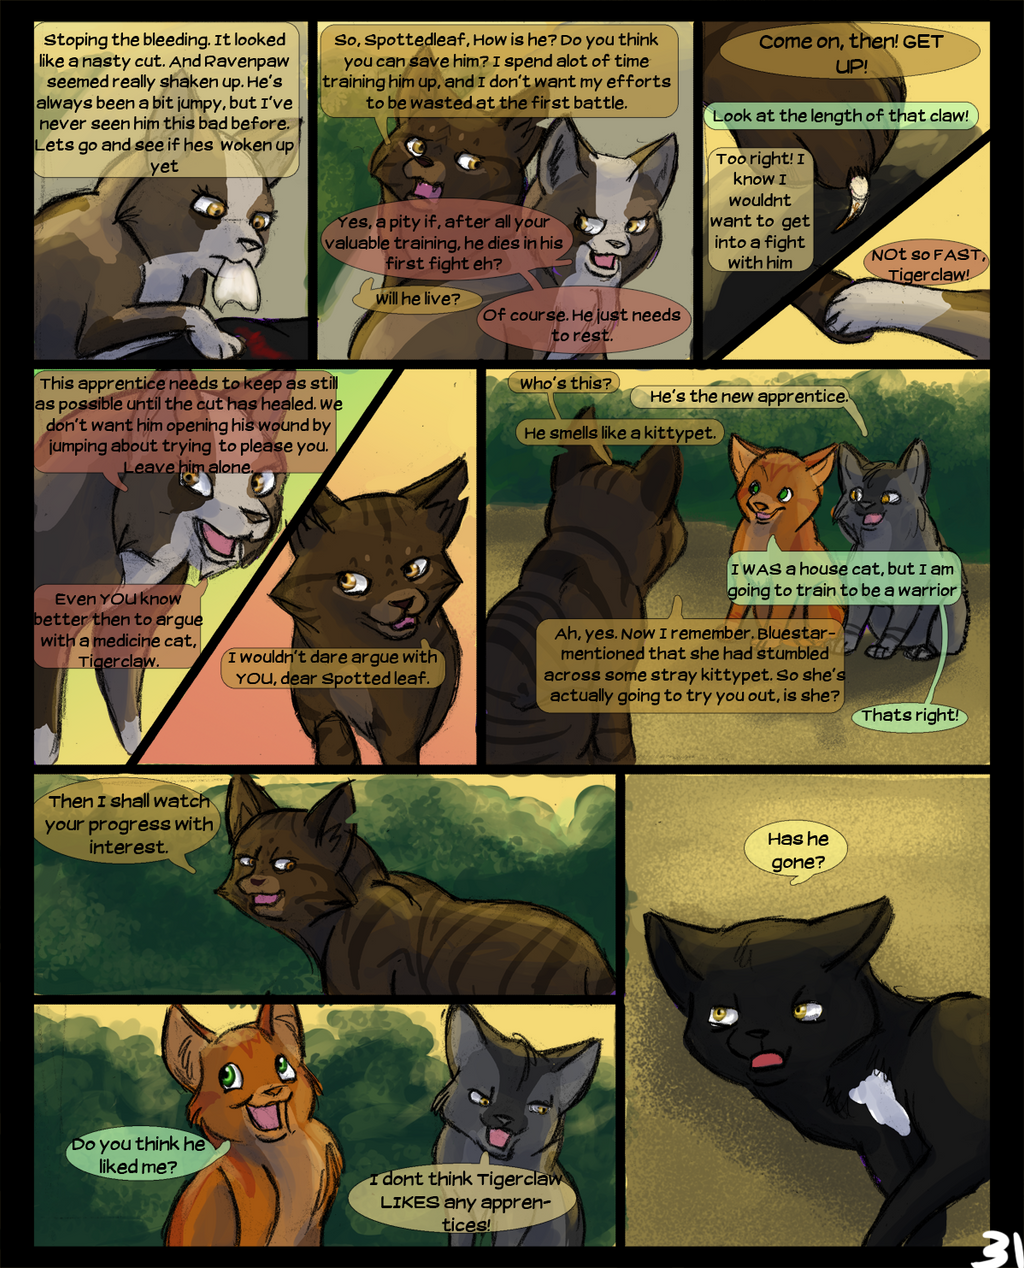 Warriors Into the Wild - Page: 35 by SassyHeart on DeviantArt